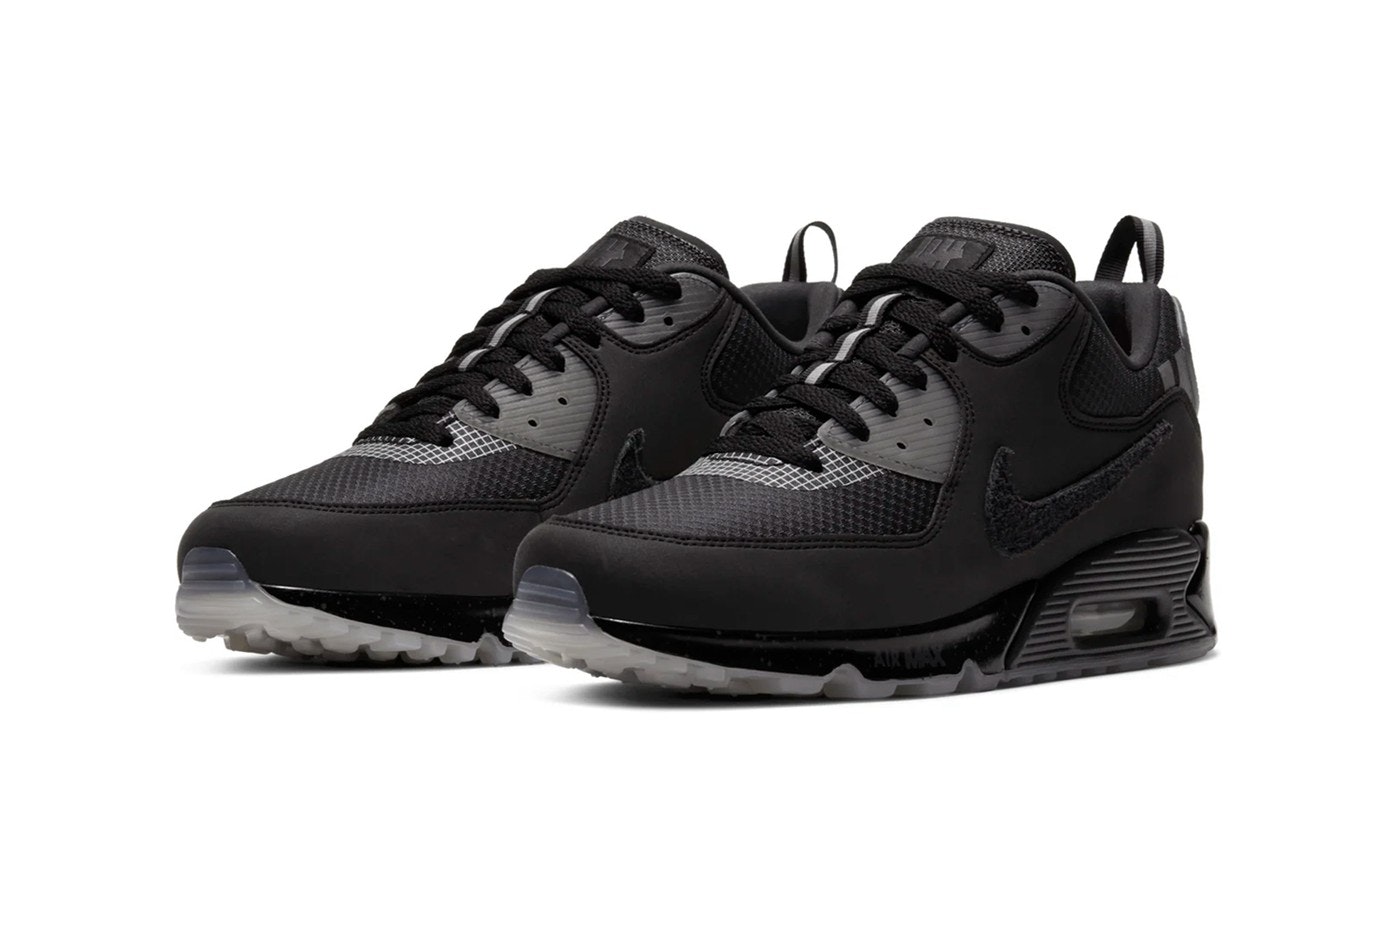 Undefeated x Nike Air Max 90 (Black)